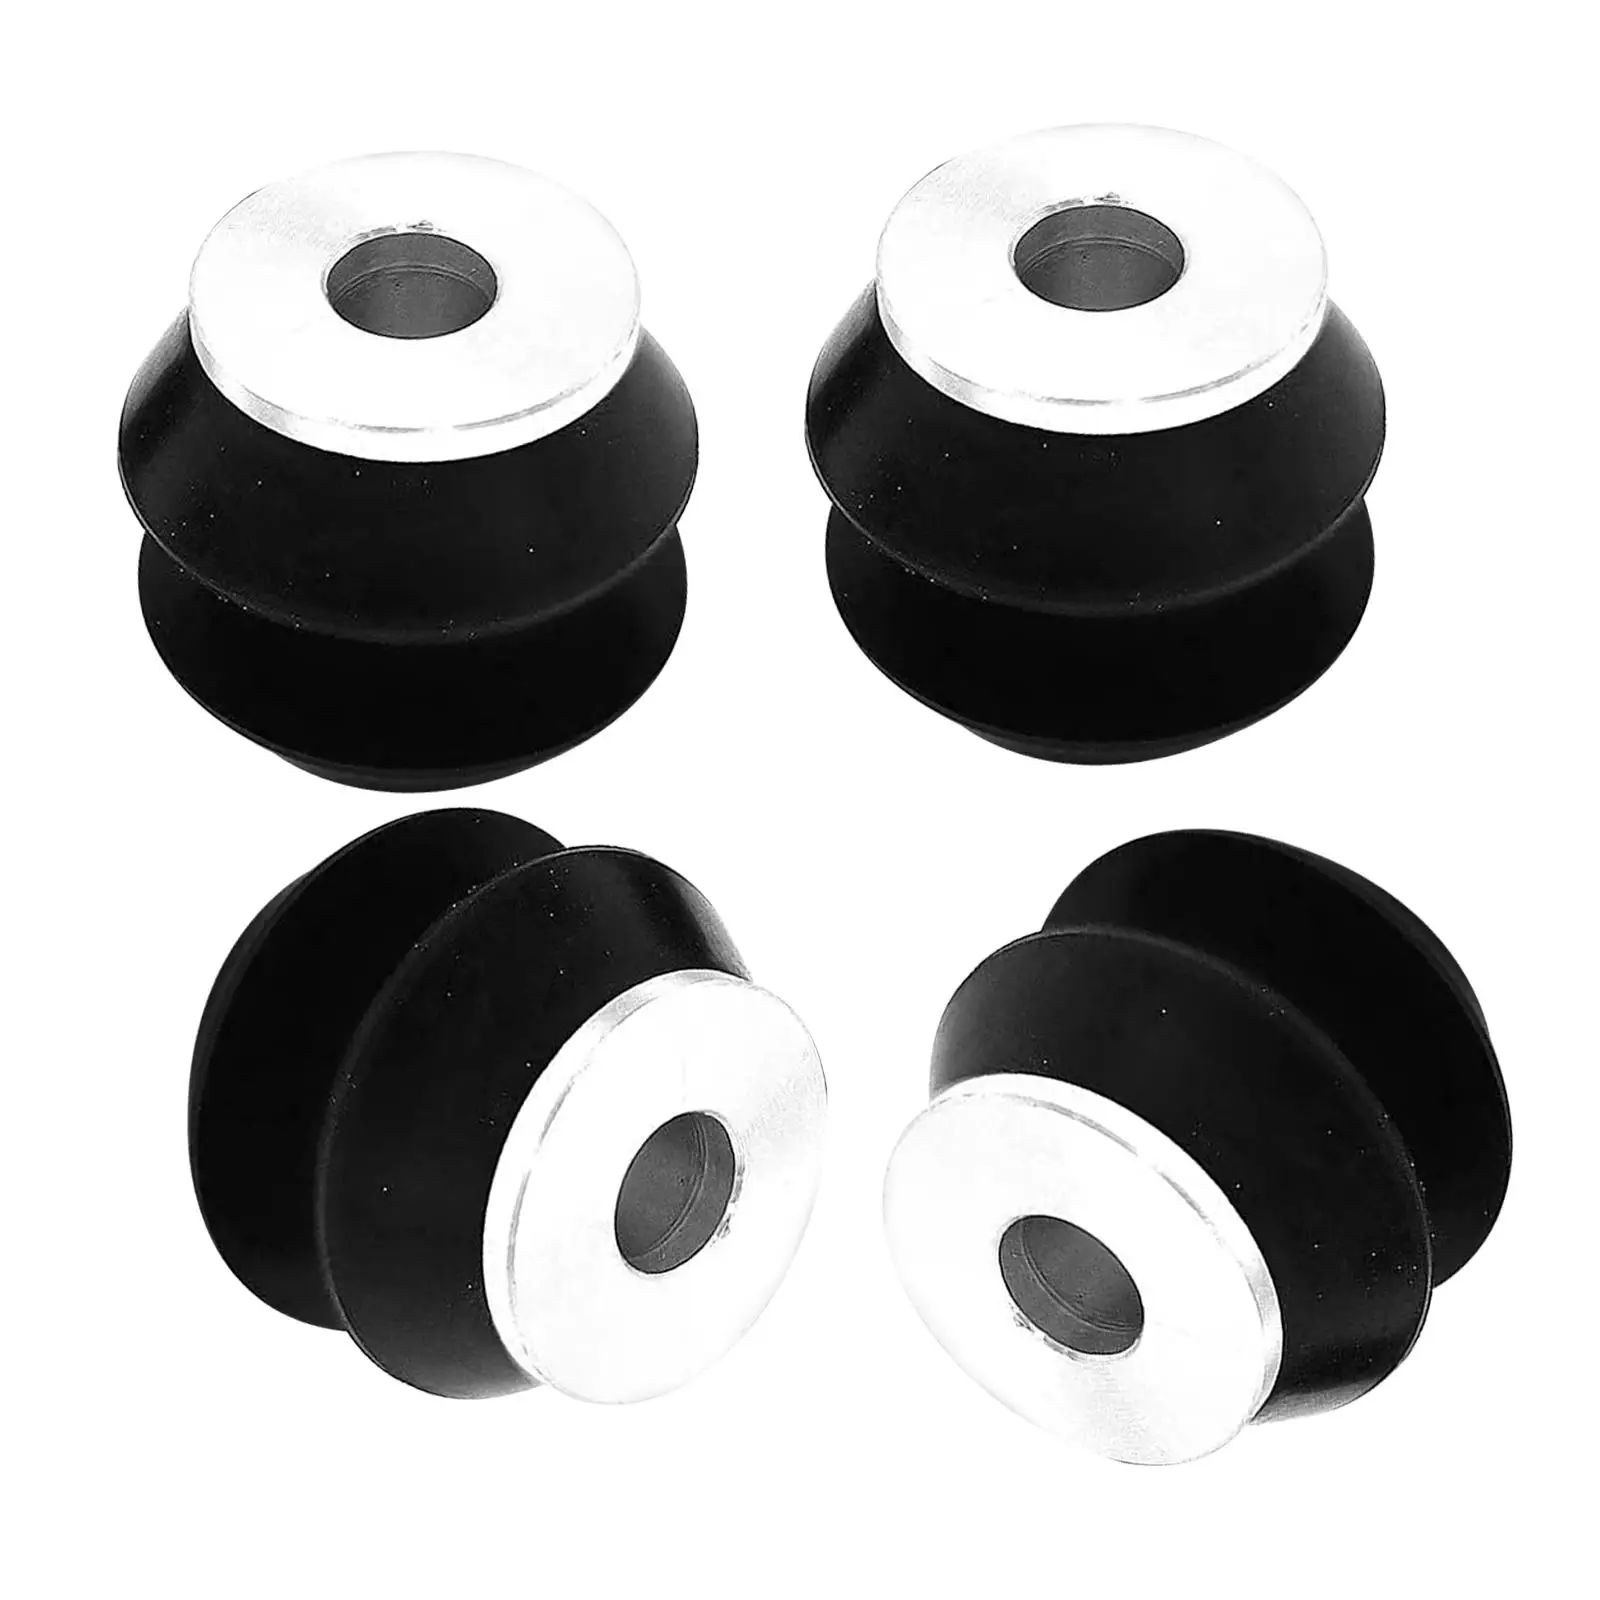 Ficm Mounting Bushing Set VT365 for Ford 6.0L Accessories High Quality